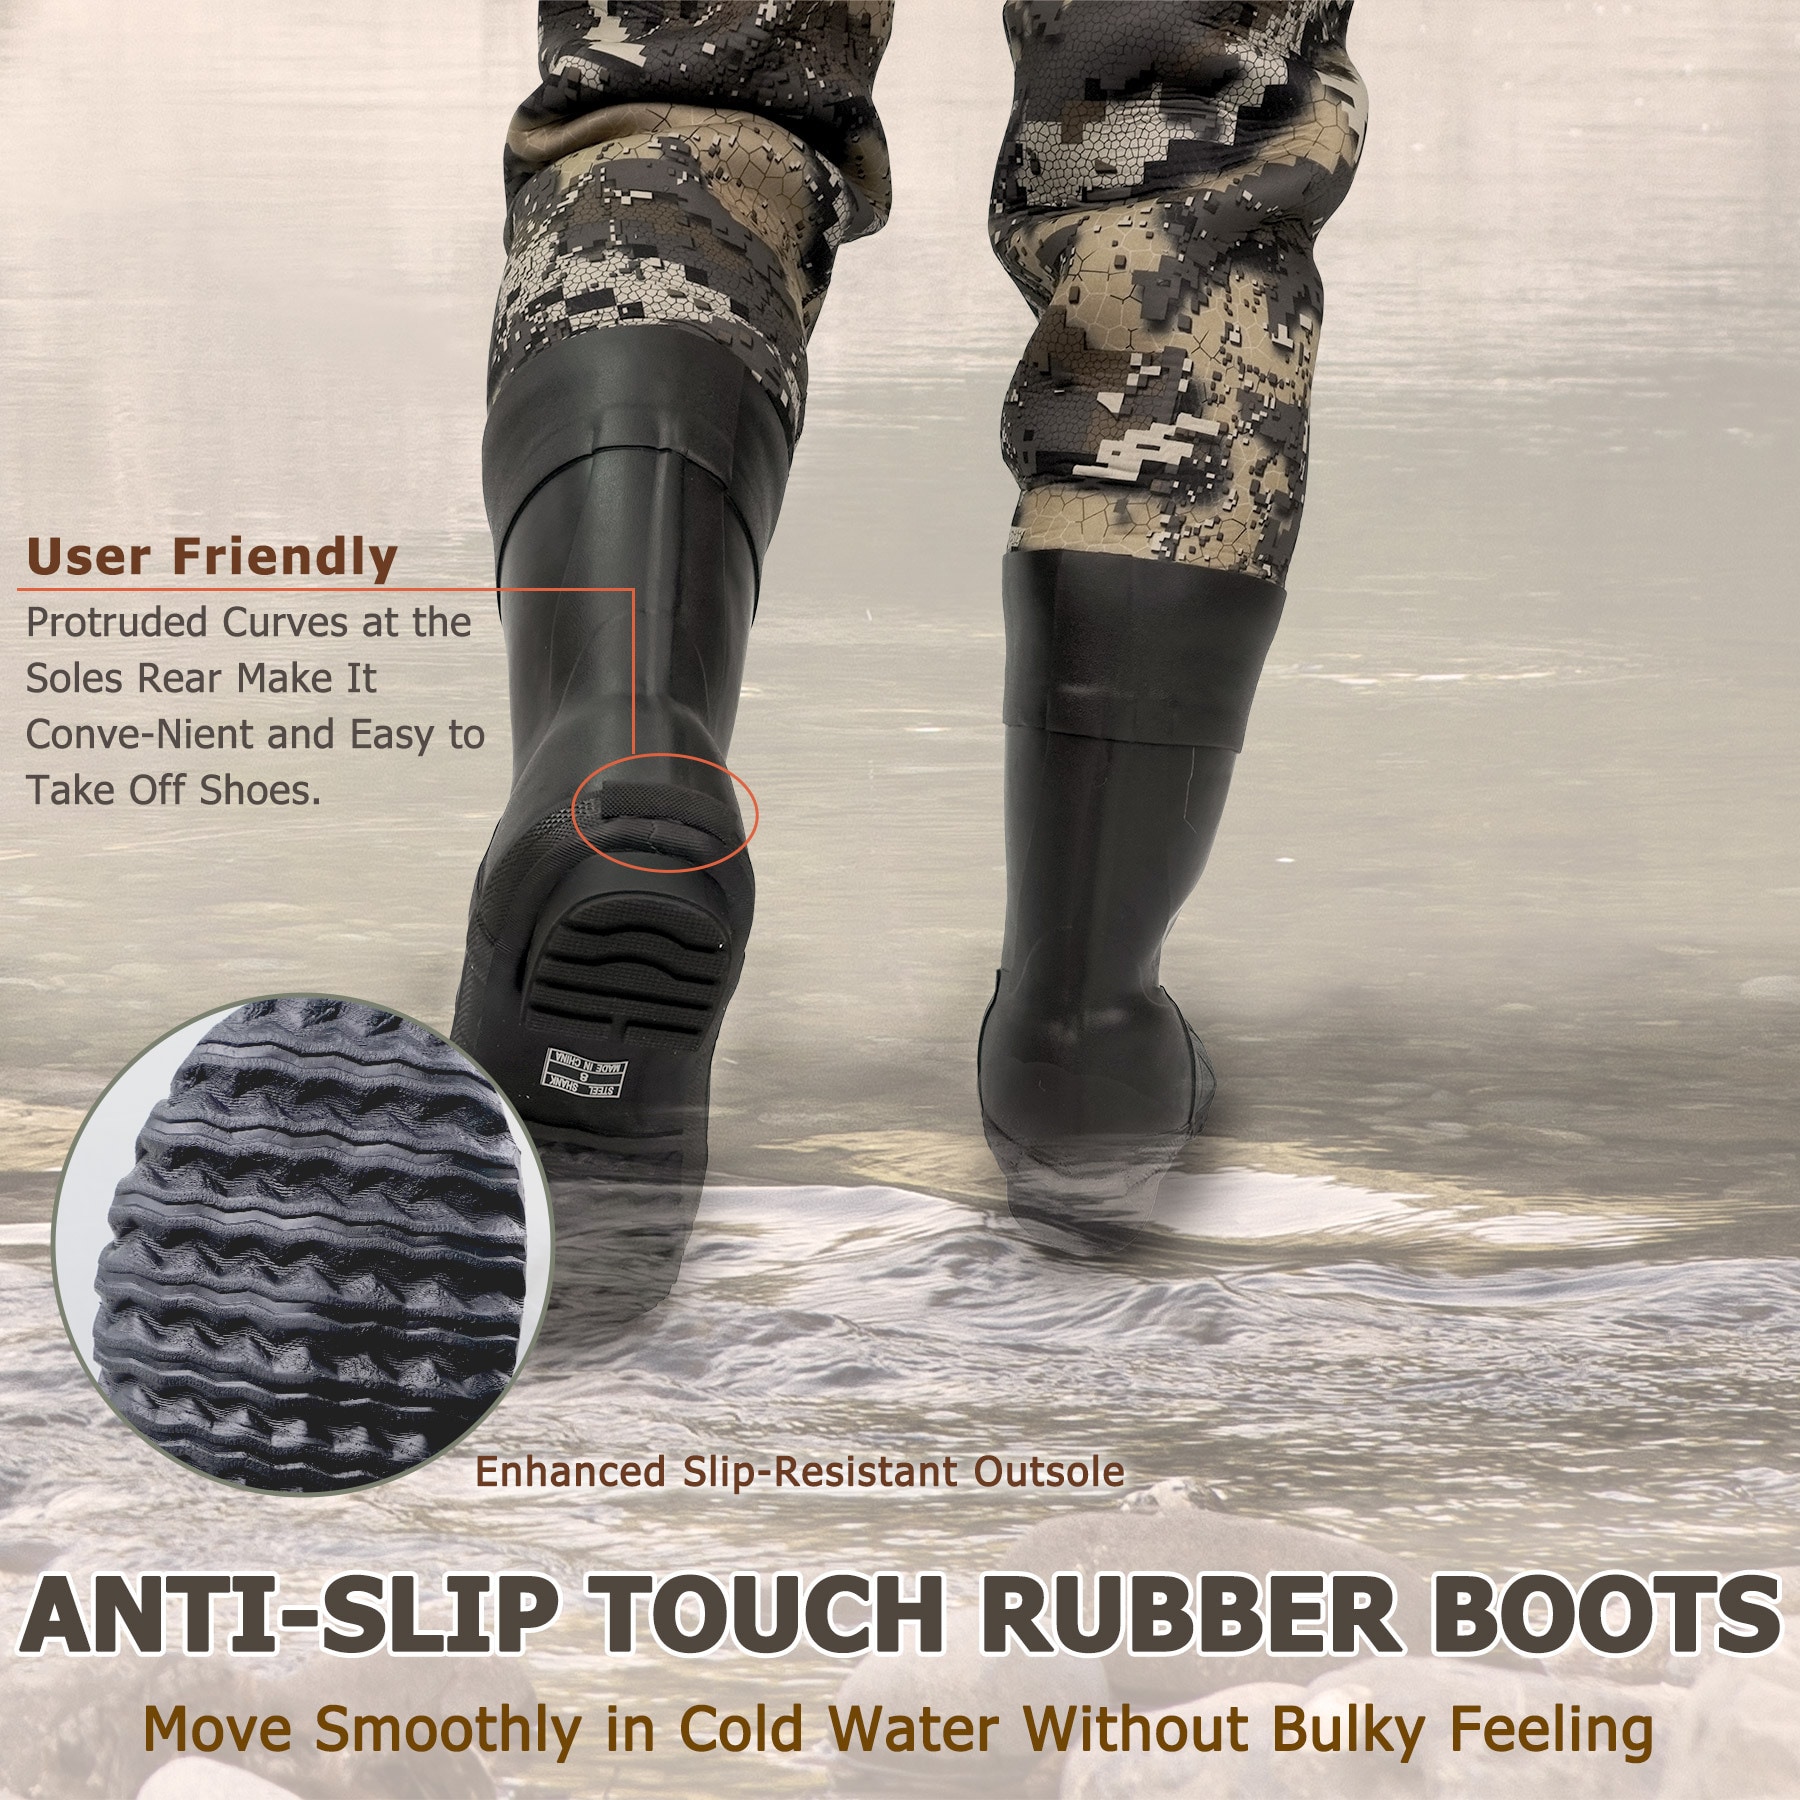 CAMOZONE Neoprene Chest Waders with Boots-size9 Unisex Fishing Jacket in  the Fishing Gear & Apparel department at